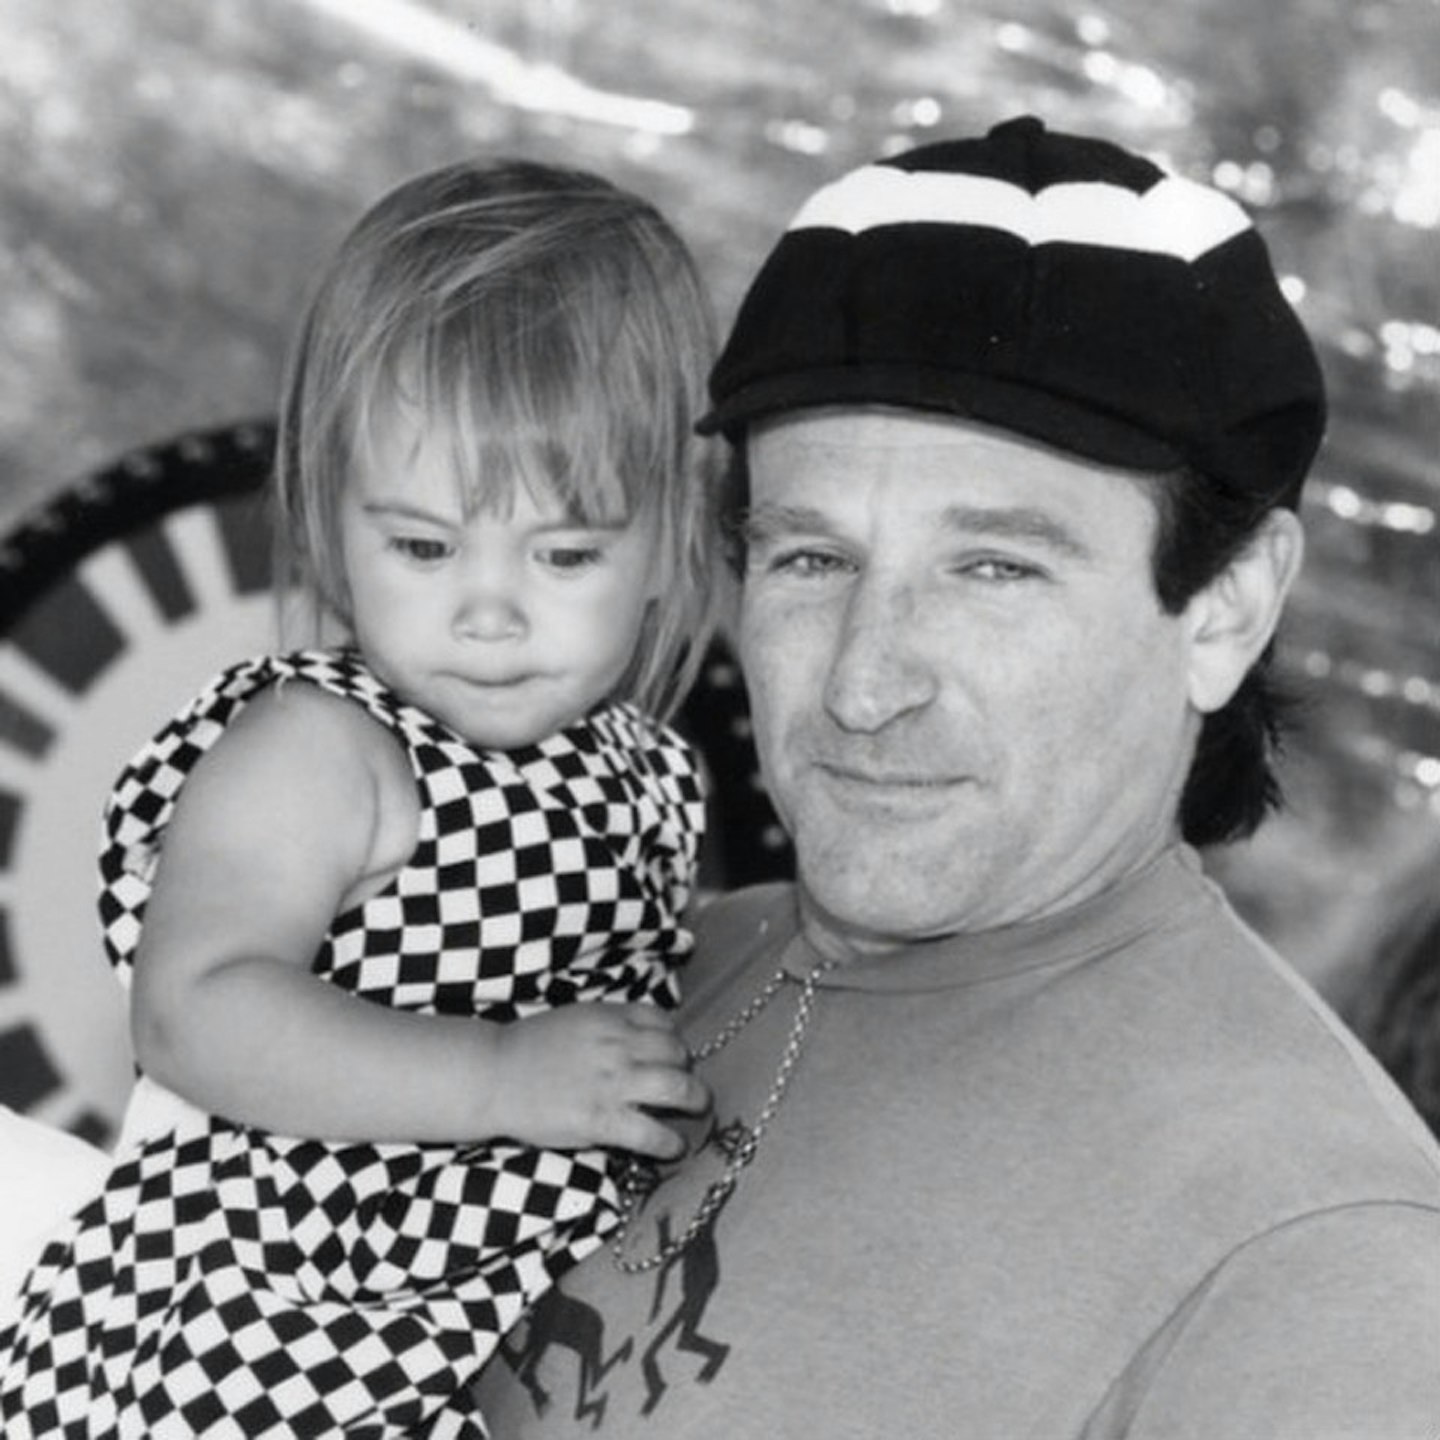 Robin and his daughter Zelda in a  #tbt photo he posted on August 1st